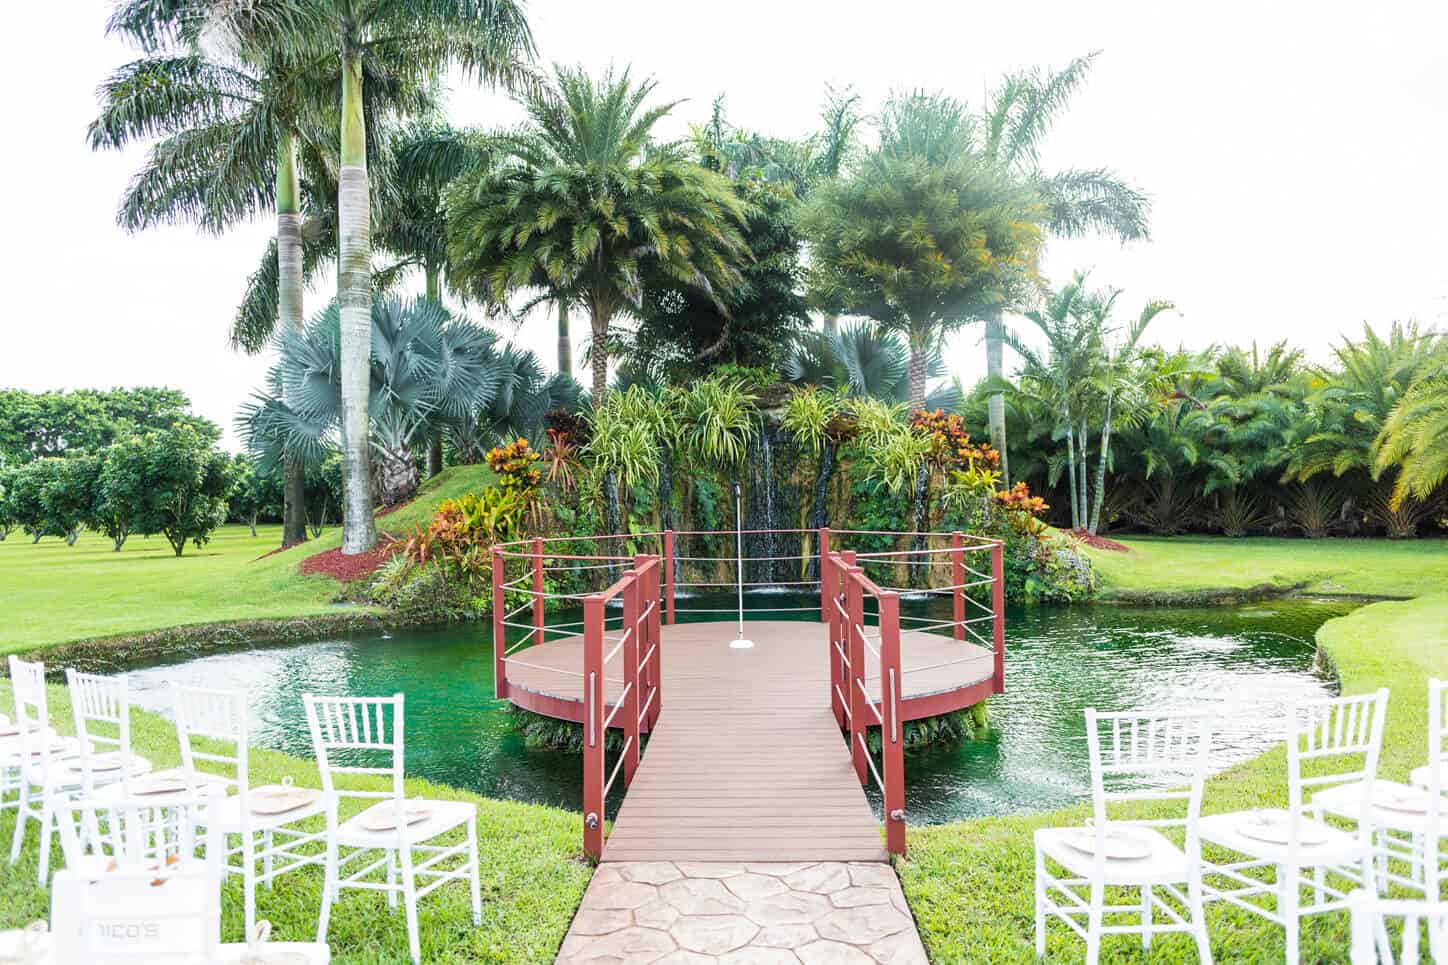 Photo of Wedding Venue in South Florida | For Wedding Vendors Post | By White House Wedding Photography